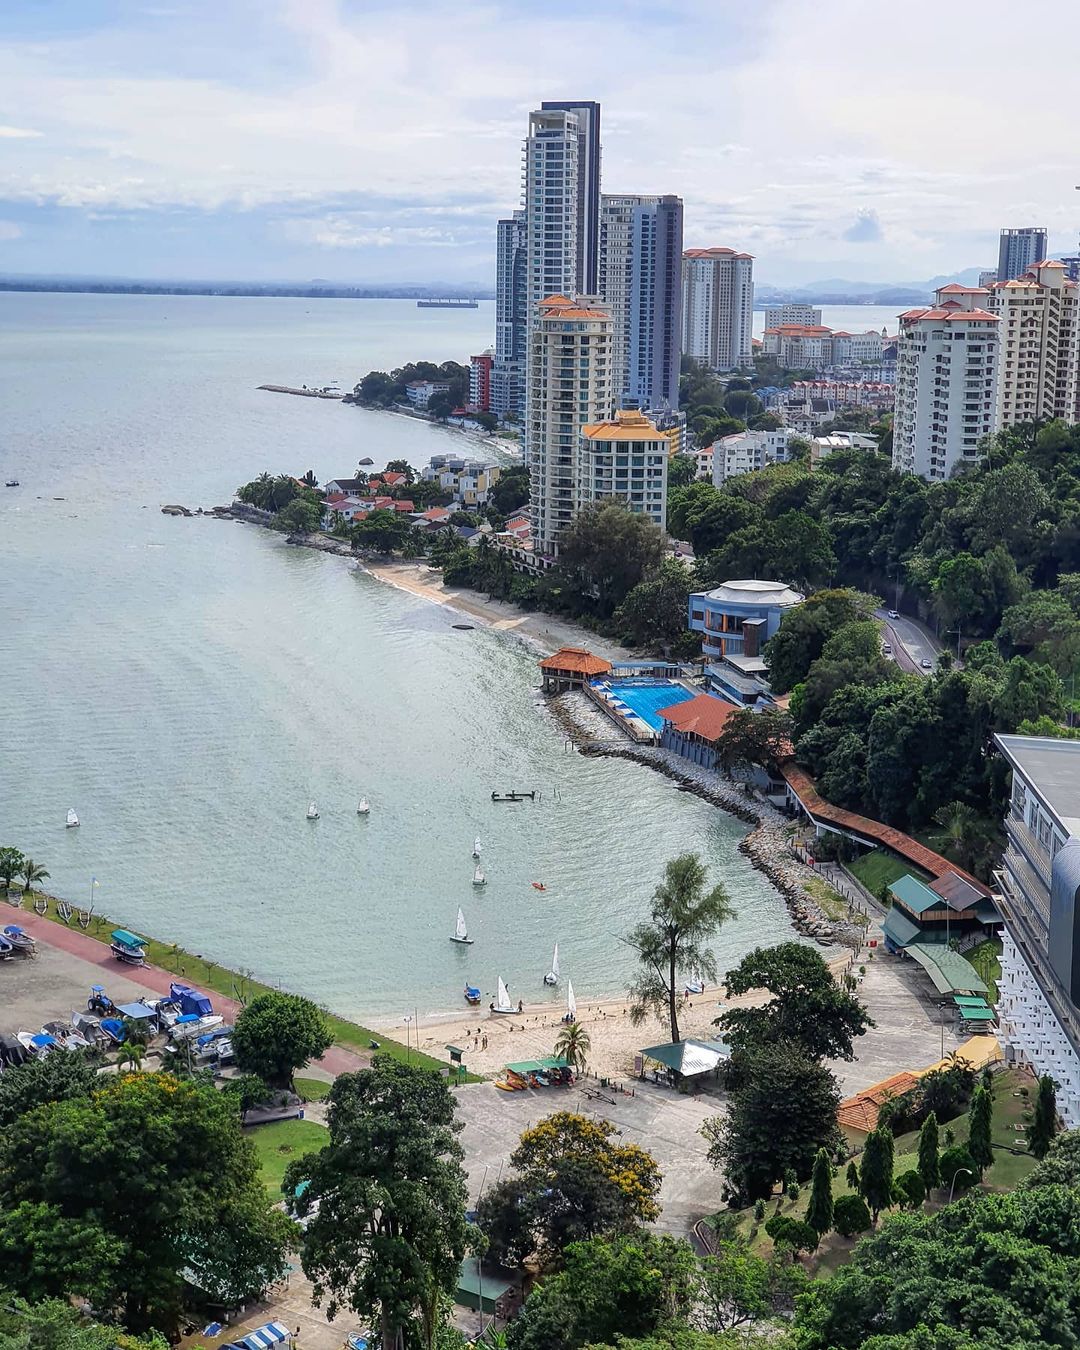 Penang listed as cheap island by Forbes - Penang